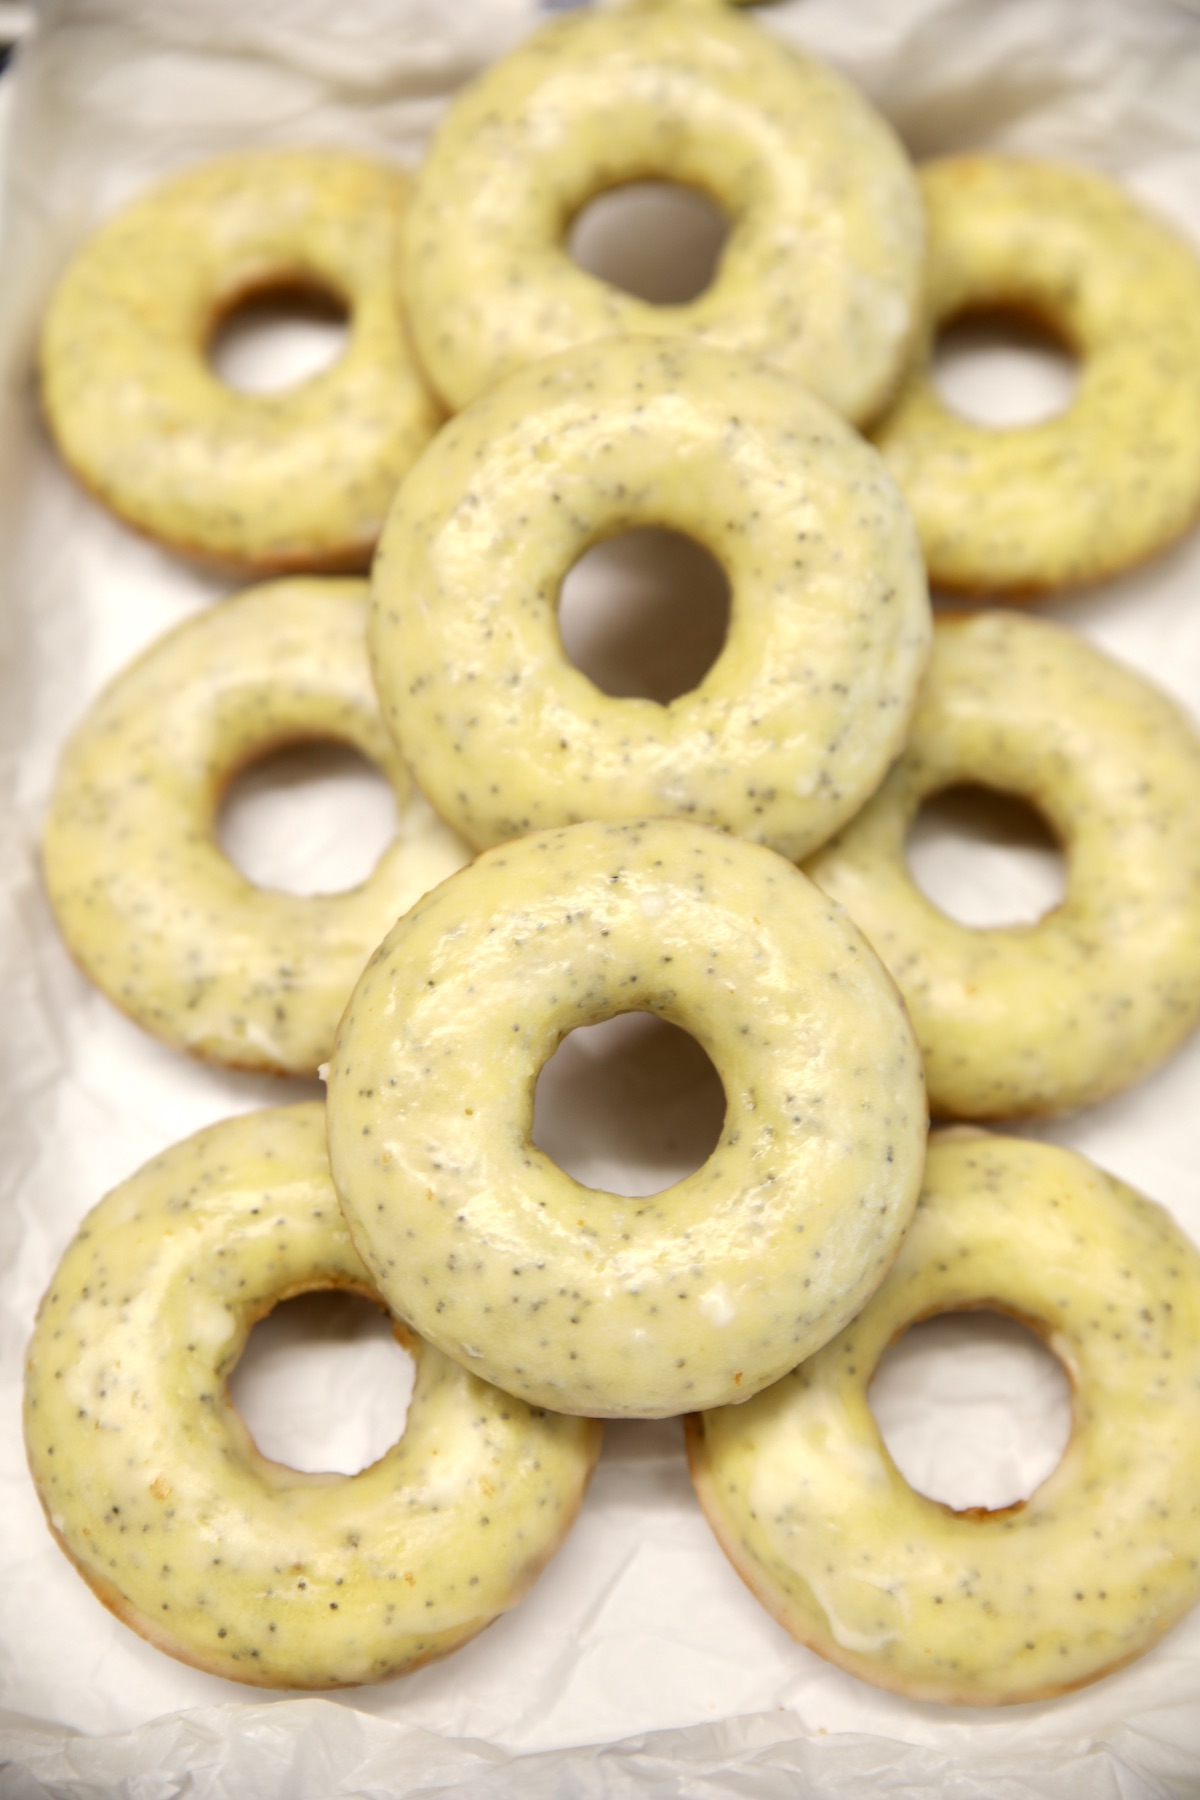 Glazed lemon poppy seed donuts stacked on a pan.